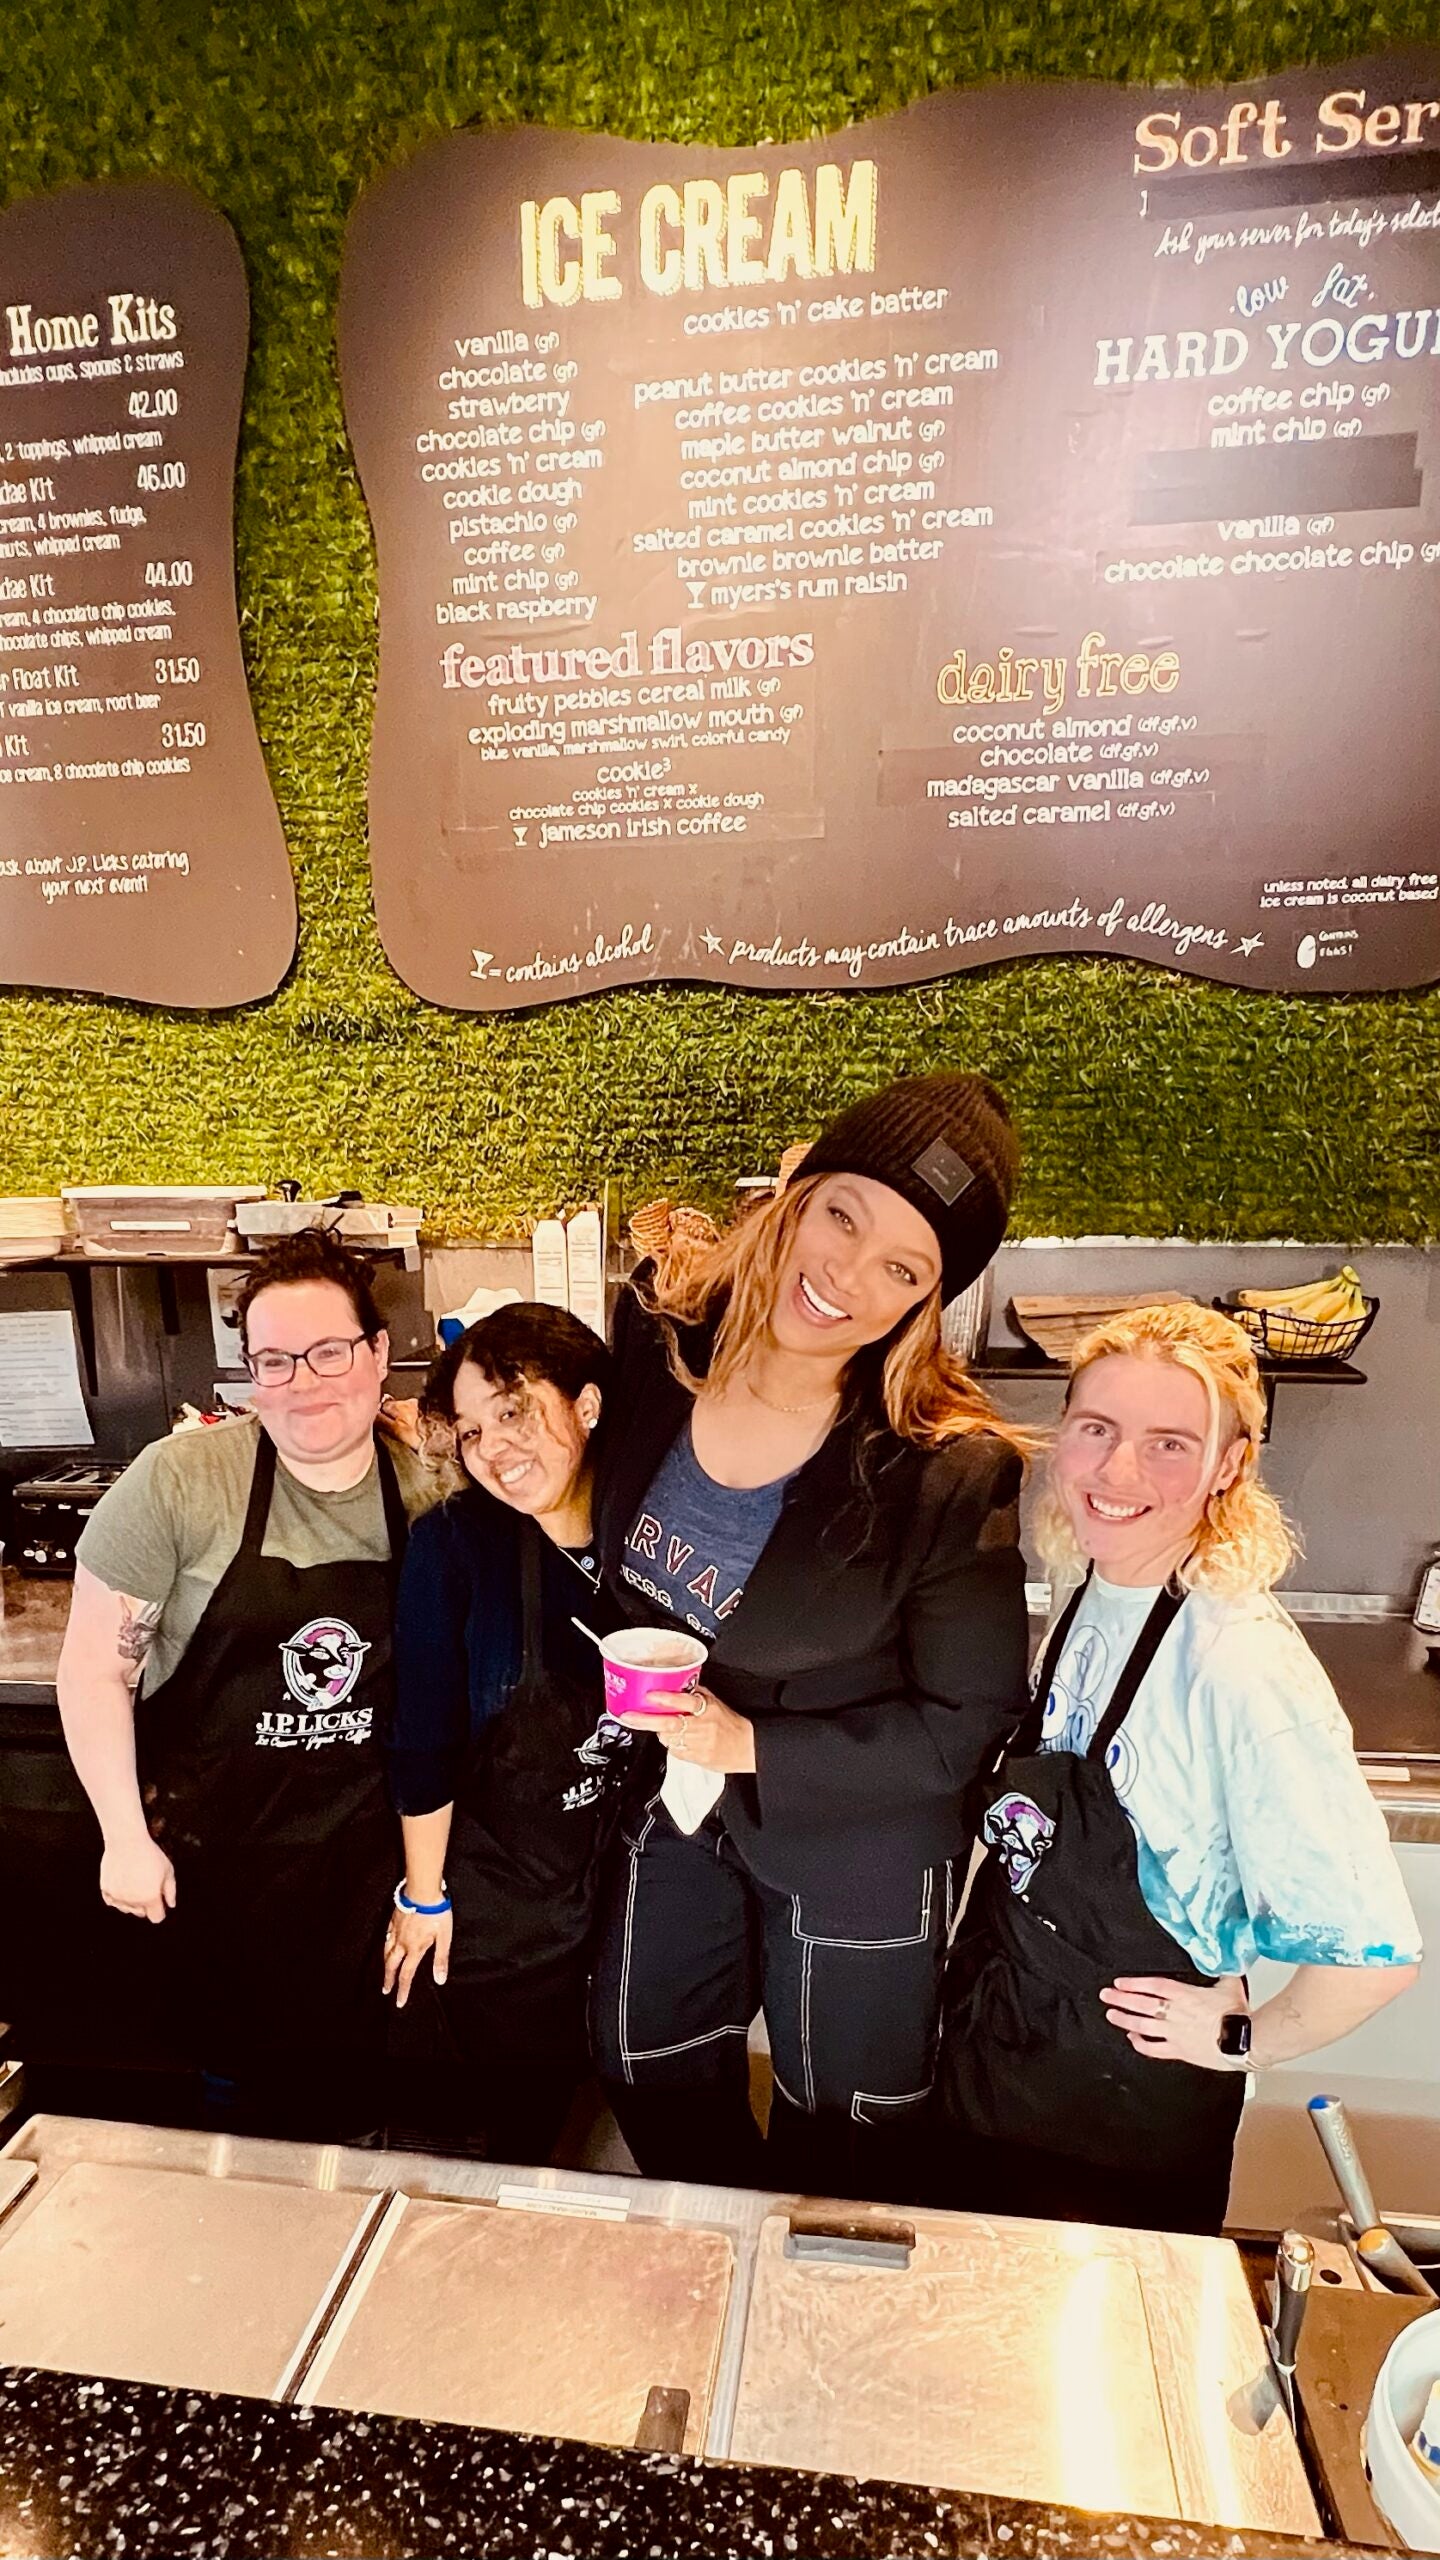 Tyra Banks paid a visit to a Harvard Square ice cream shop